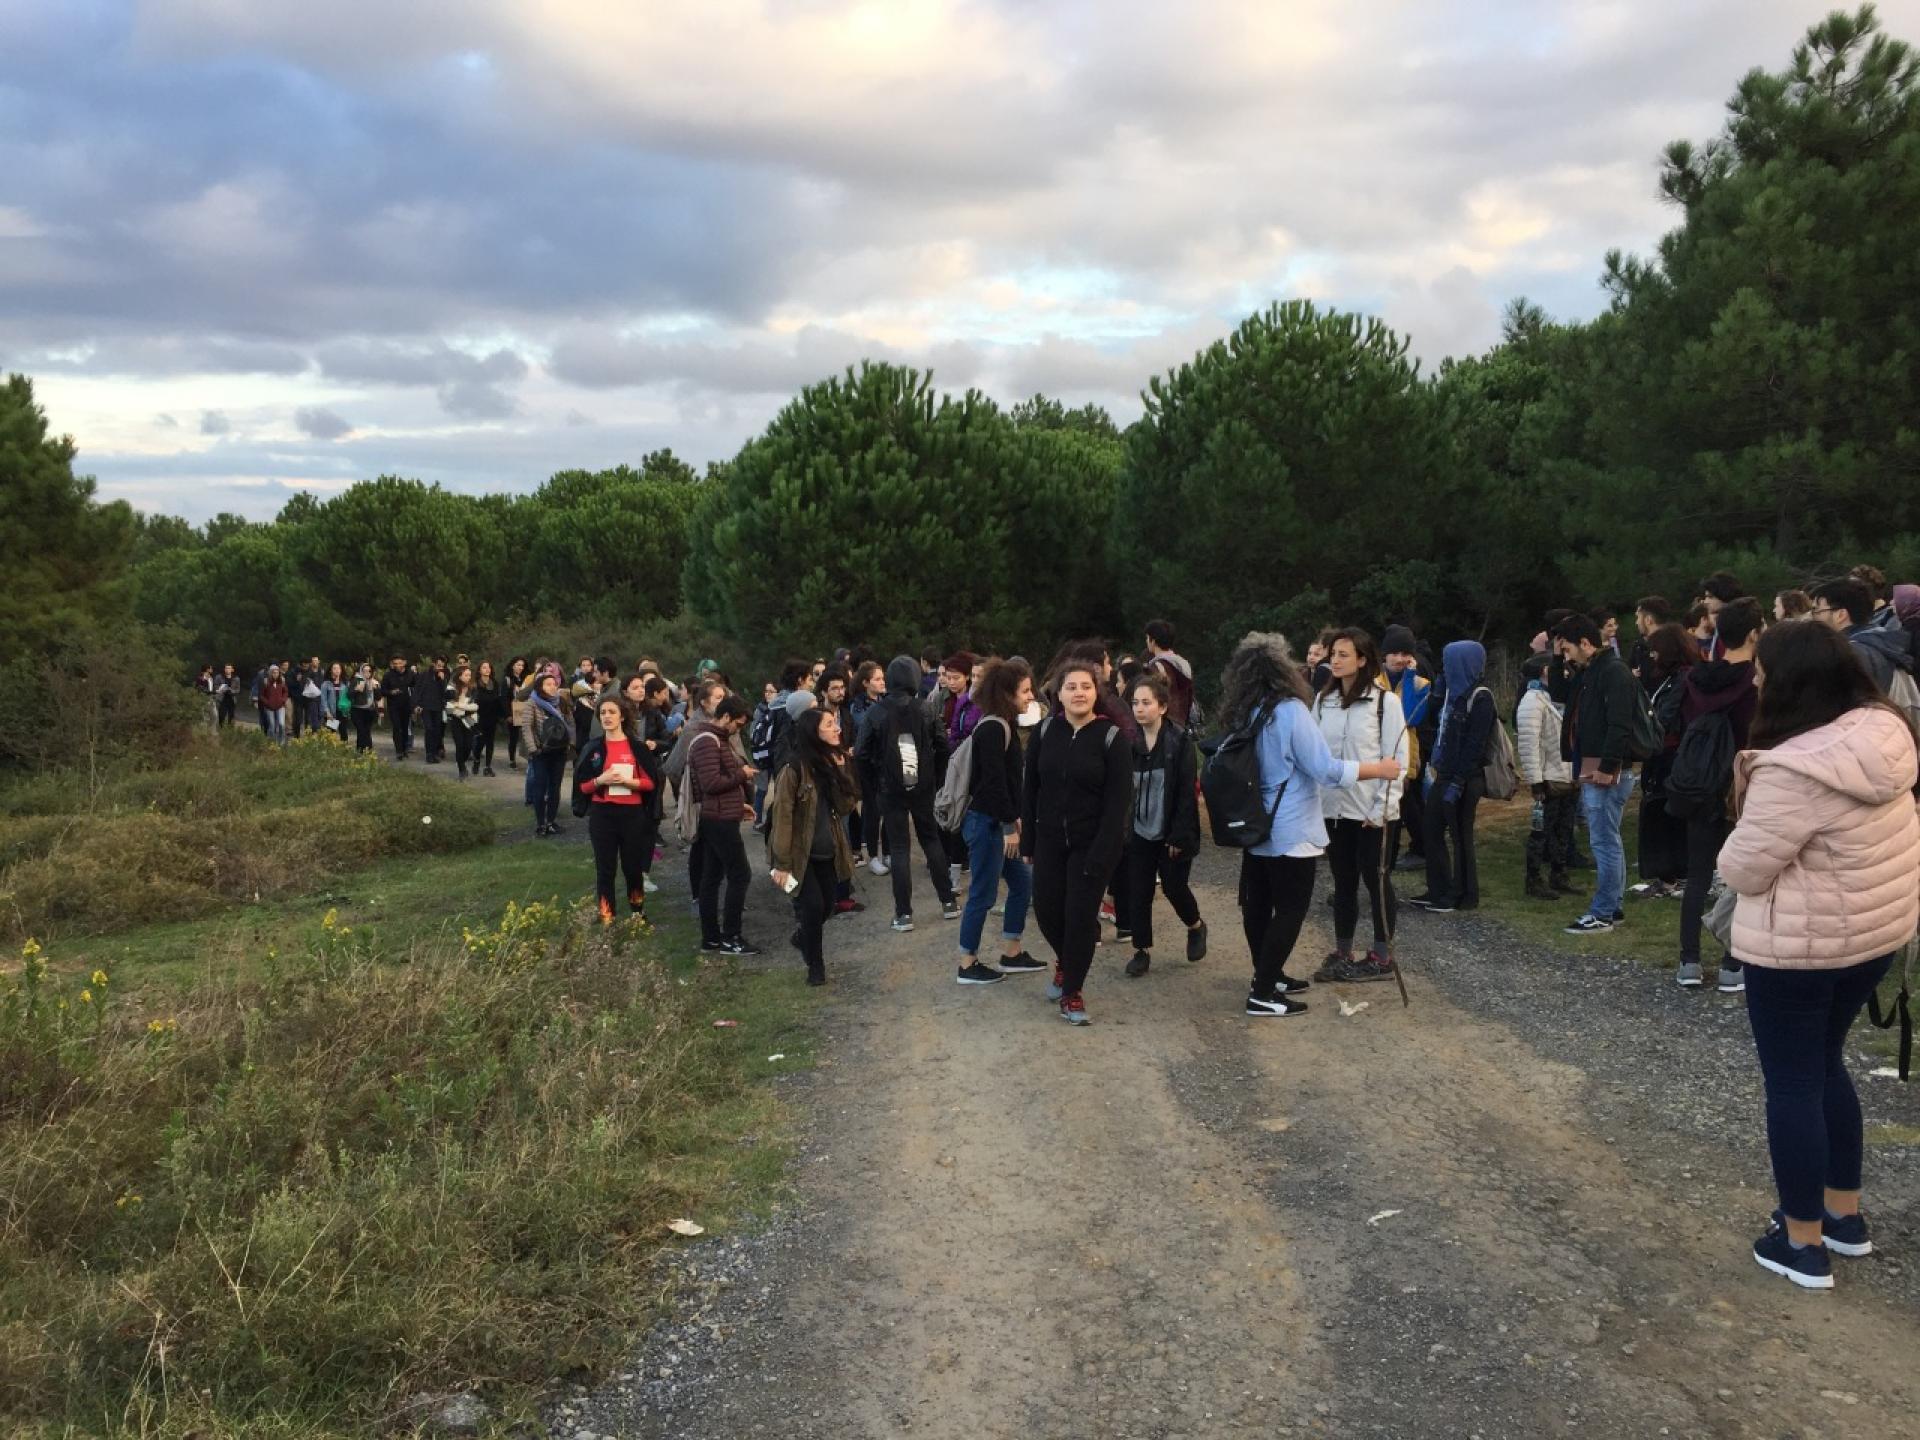 The walk of 250 people